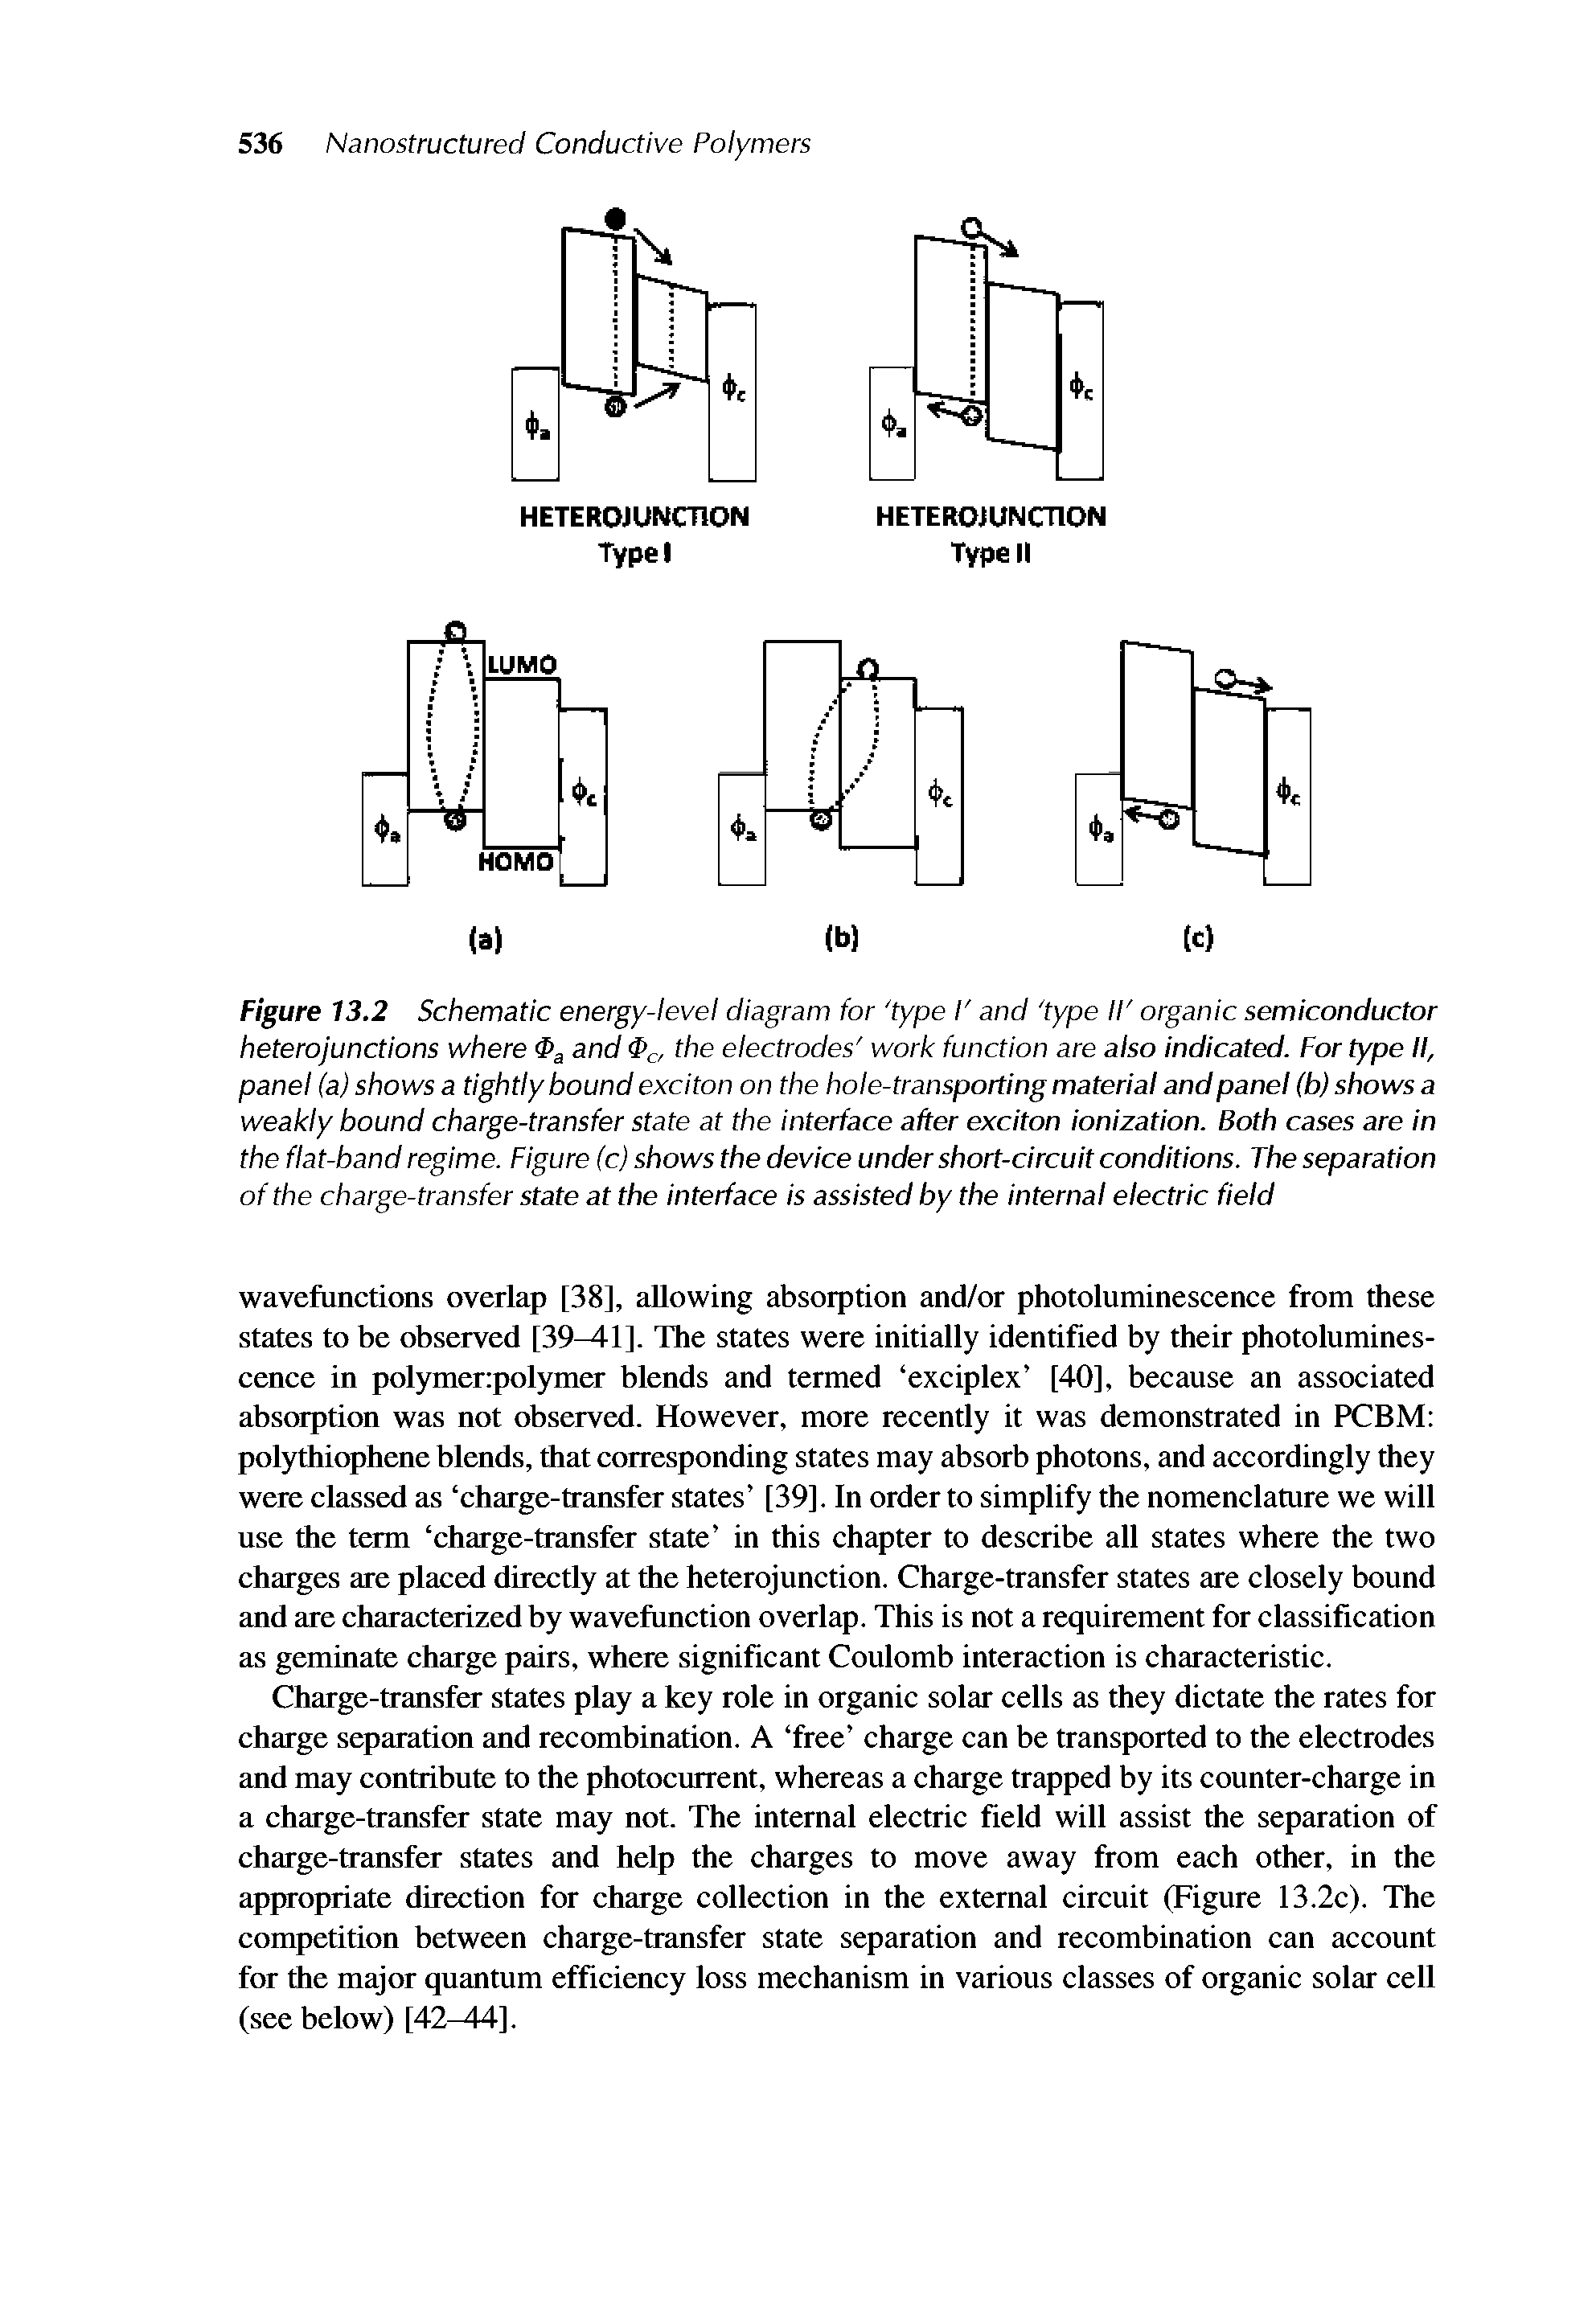 Figure 13.2 Schematic energy-level diagram for type I and type II organic semiconductor heterojunctions where and electrodes work function are also indicated. For type II,...